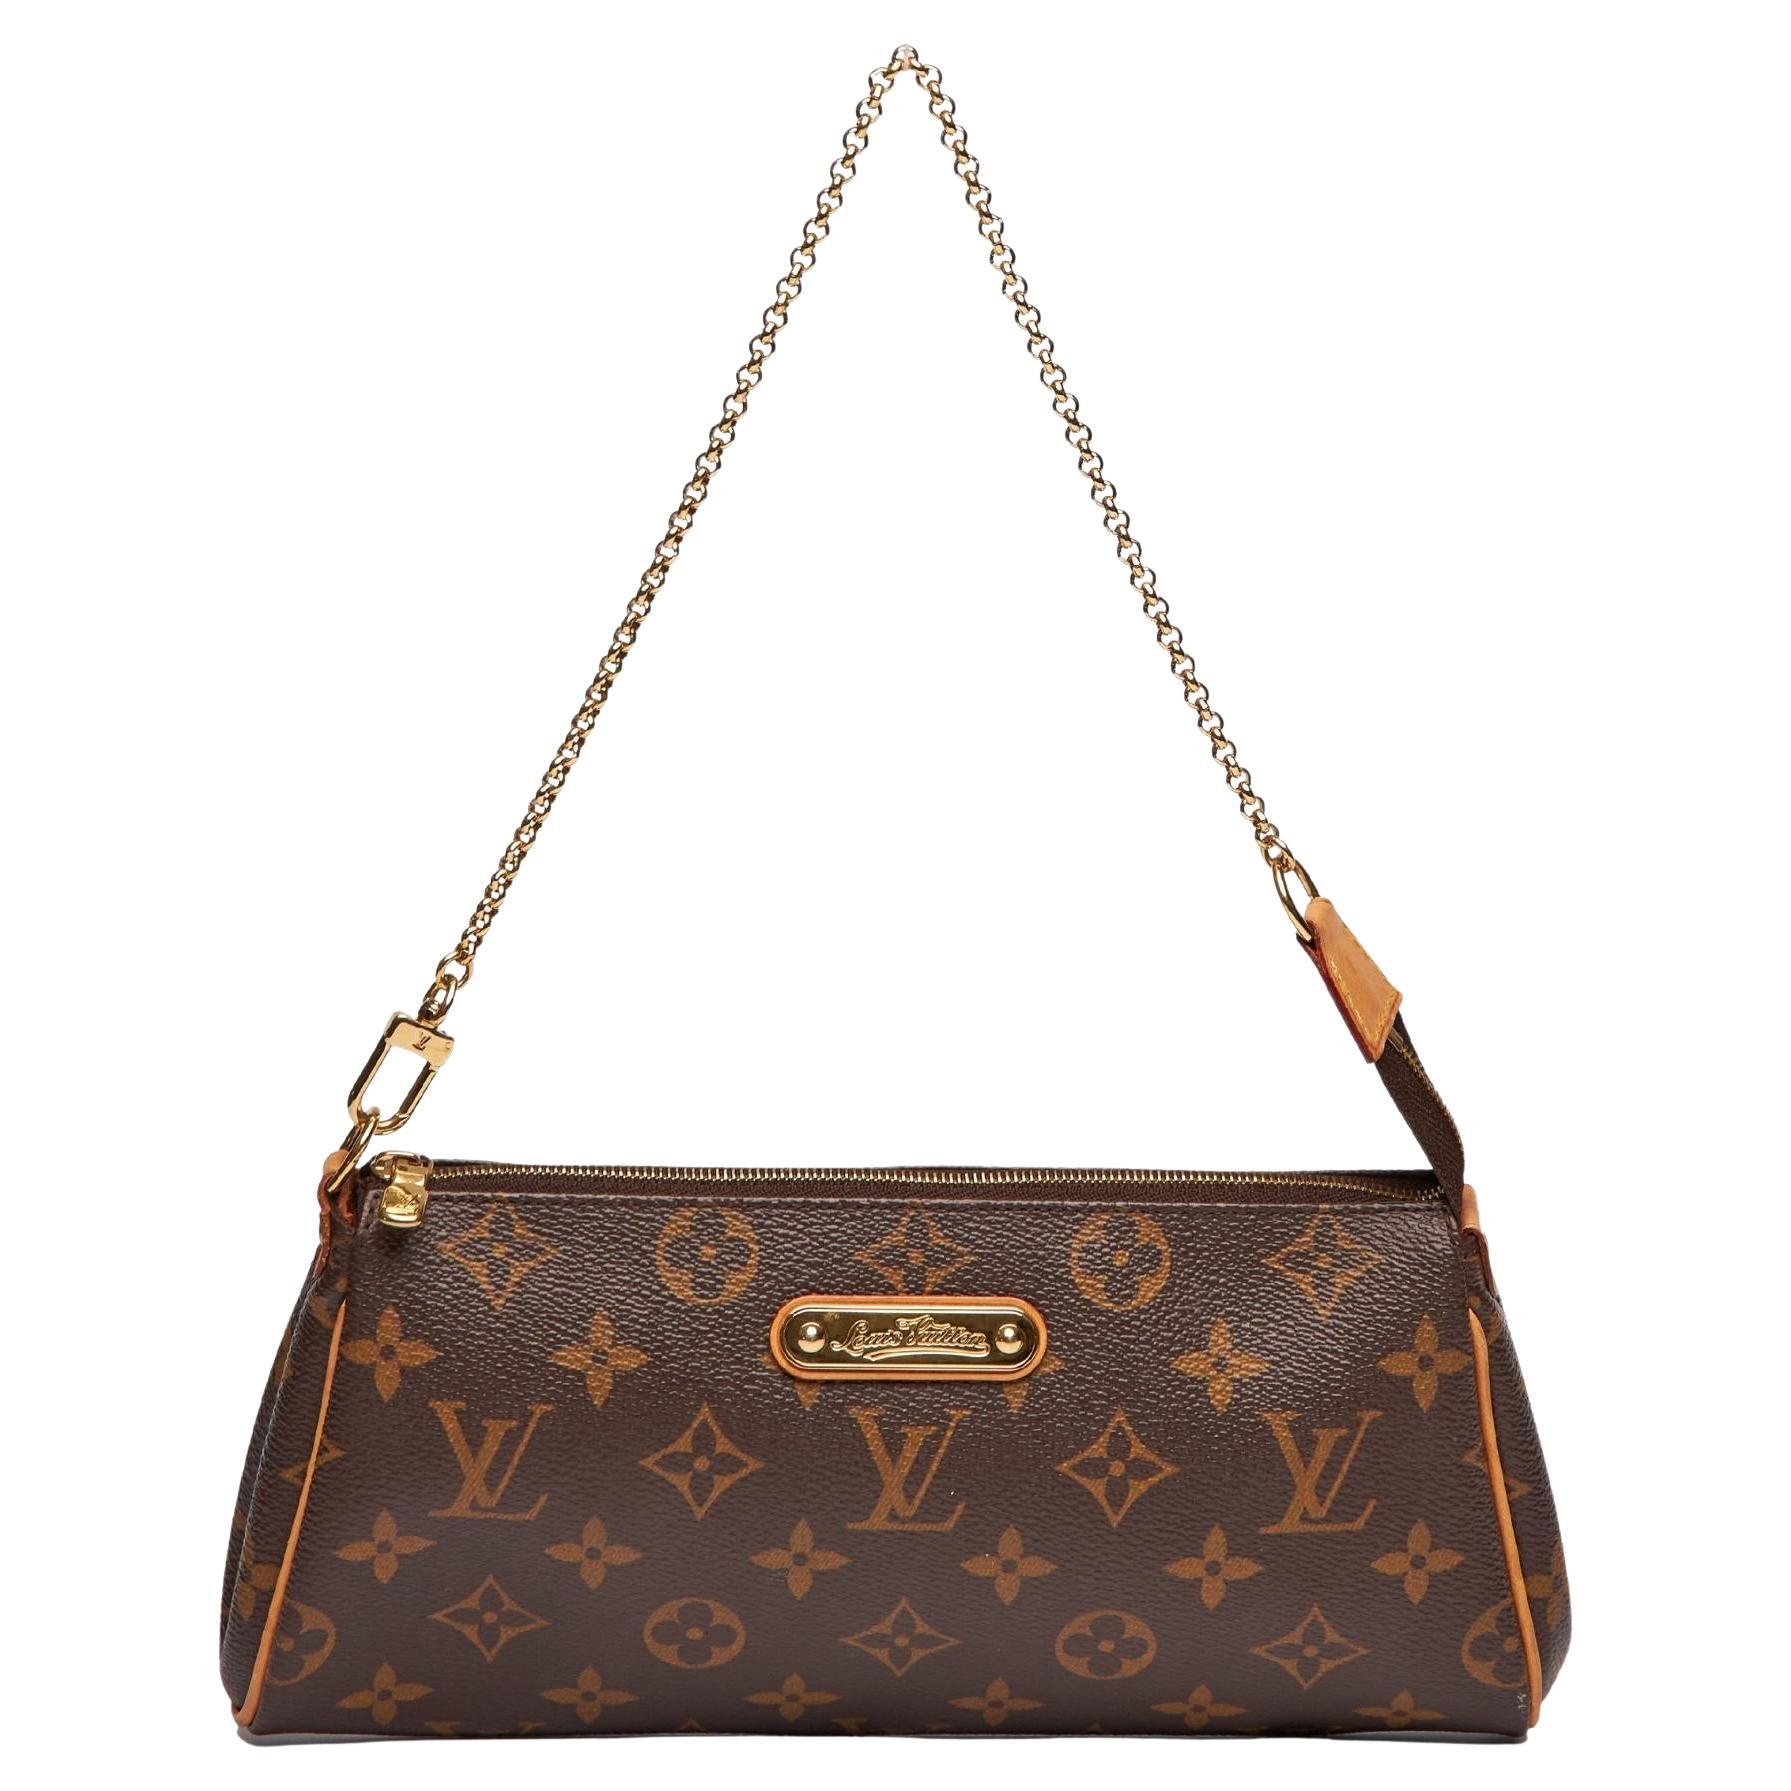 Louis Vuitton Eva Clutch Used - For Sale on 1stDibs